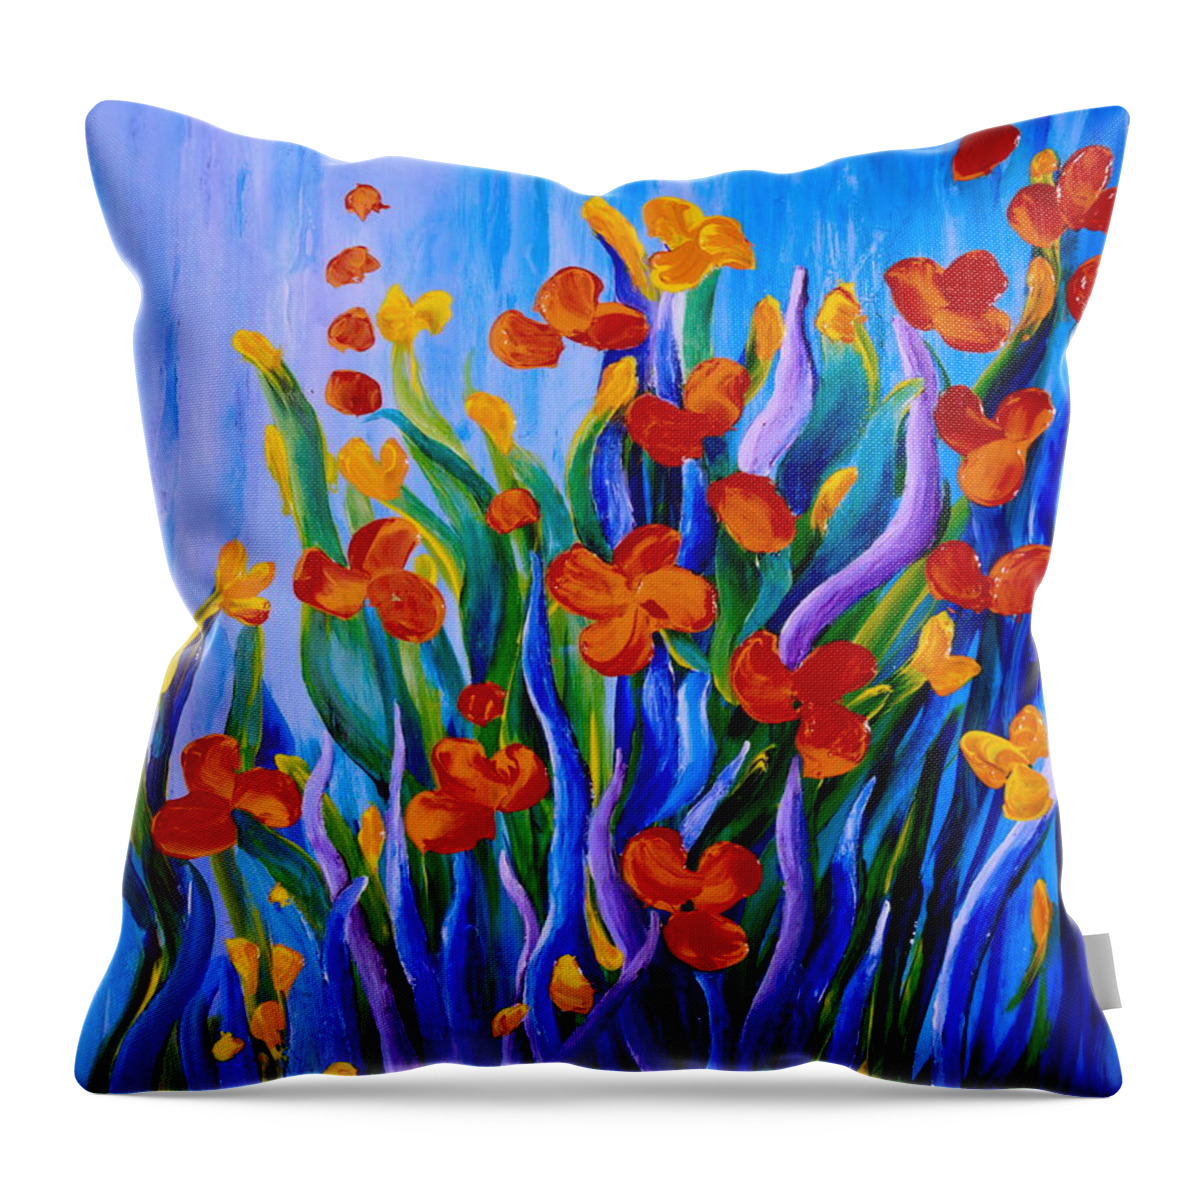 Floral Throw Pillow featuring the painting Calm by Teresa Wegrzyn